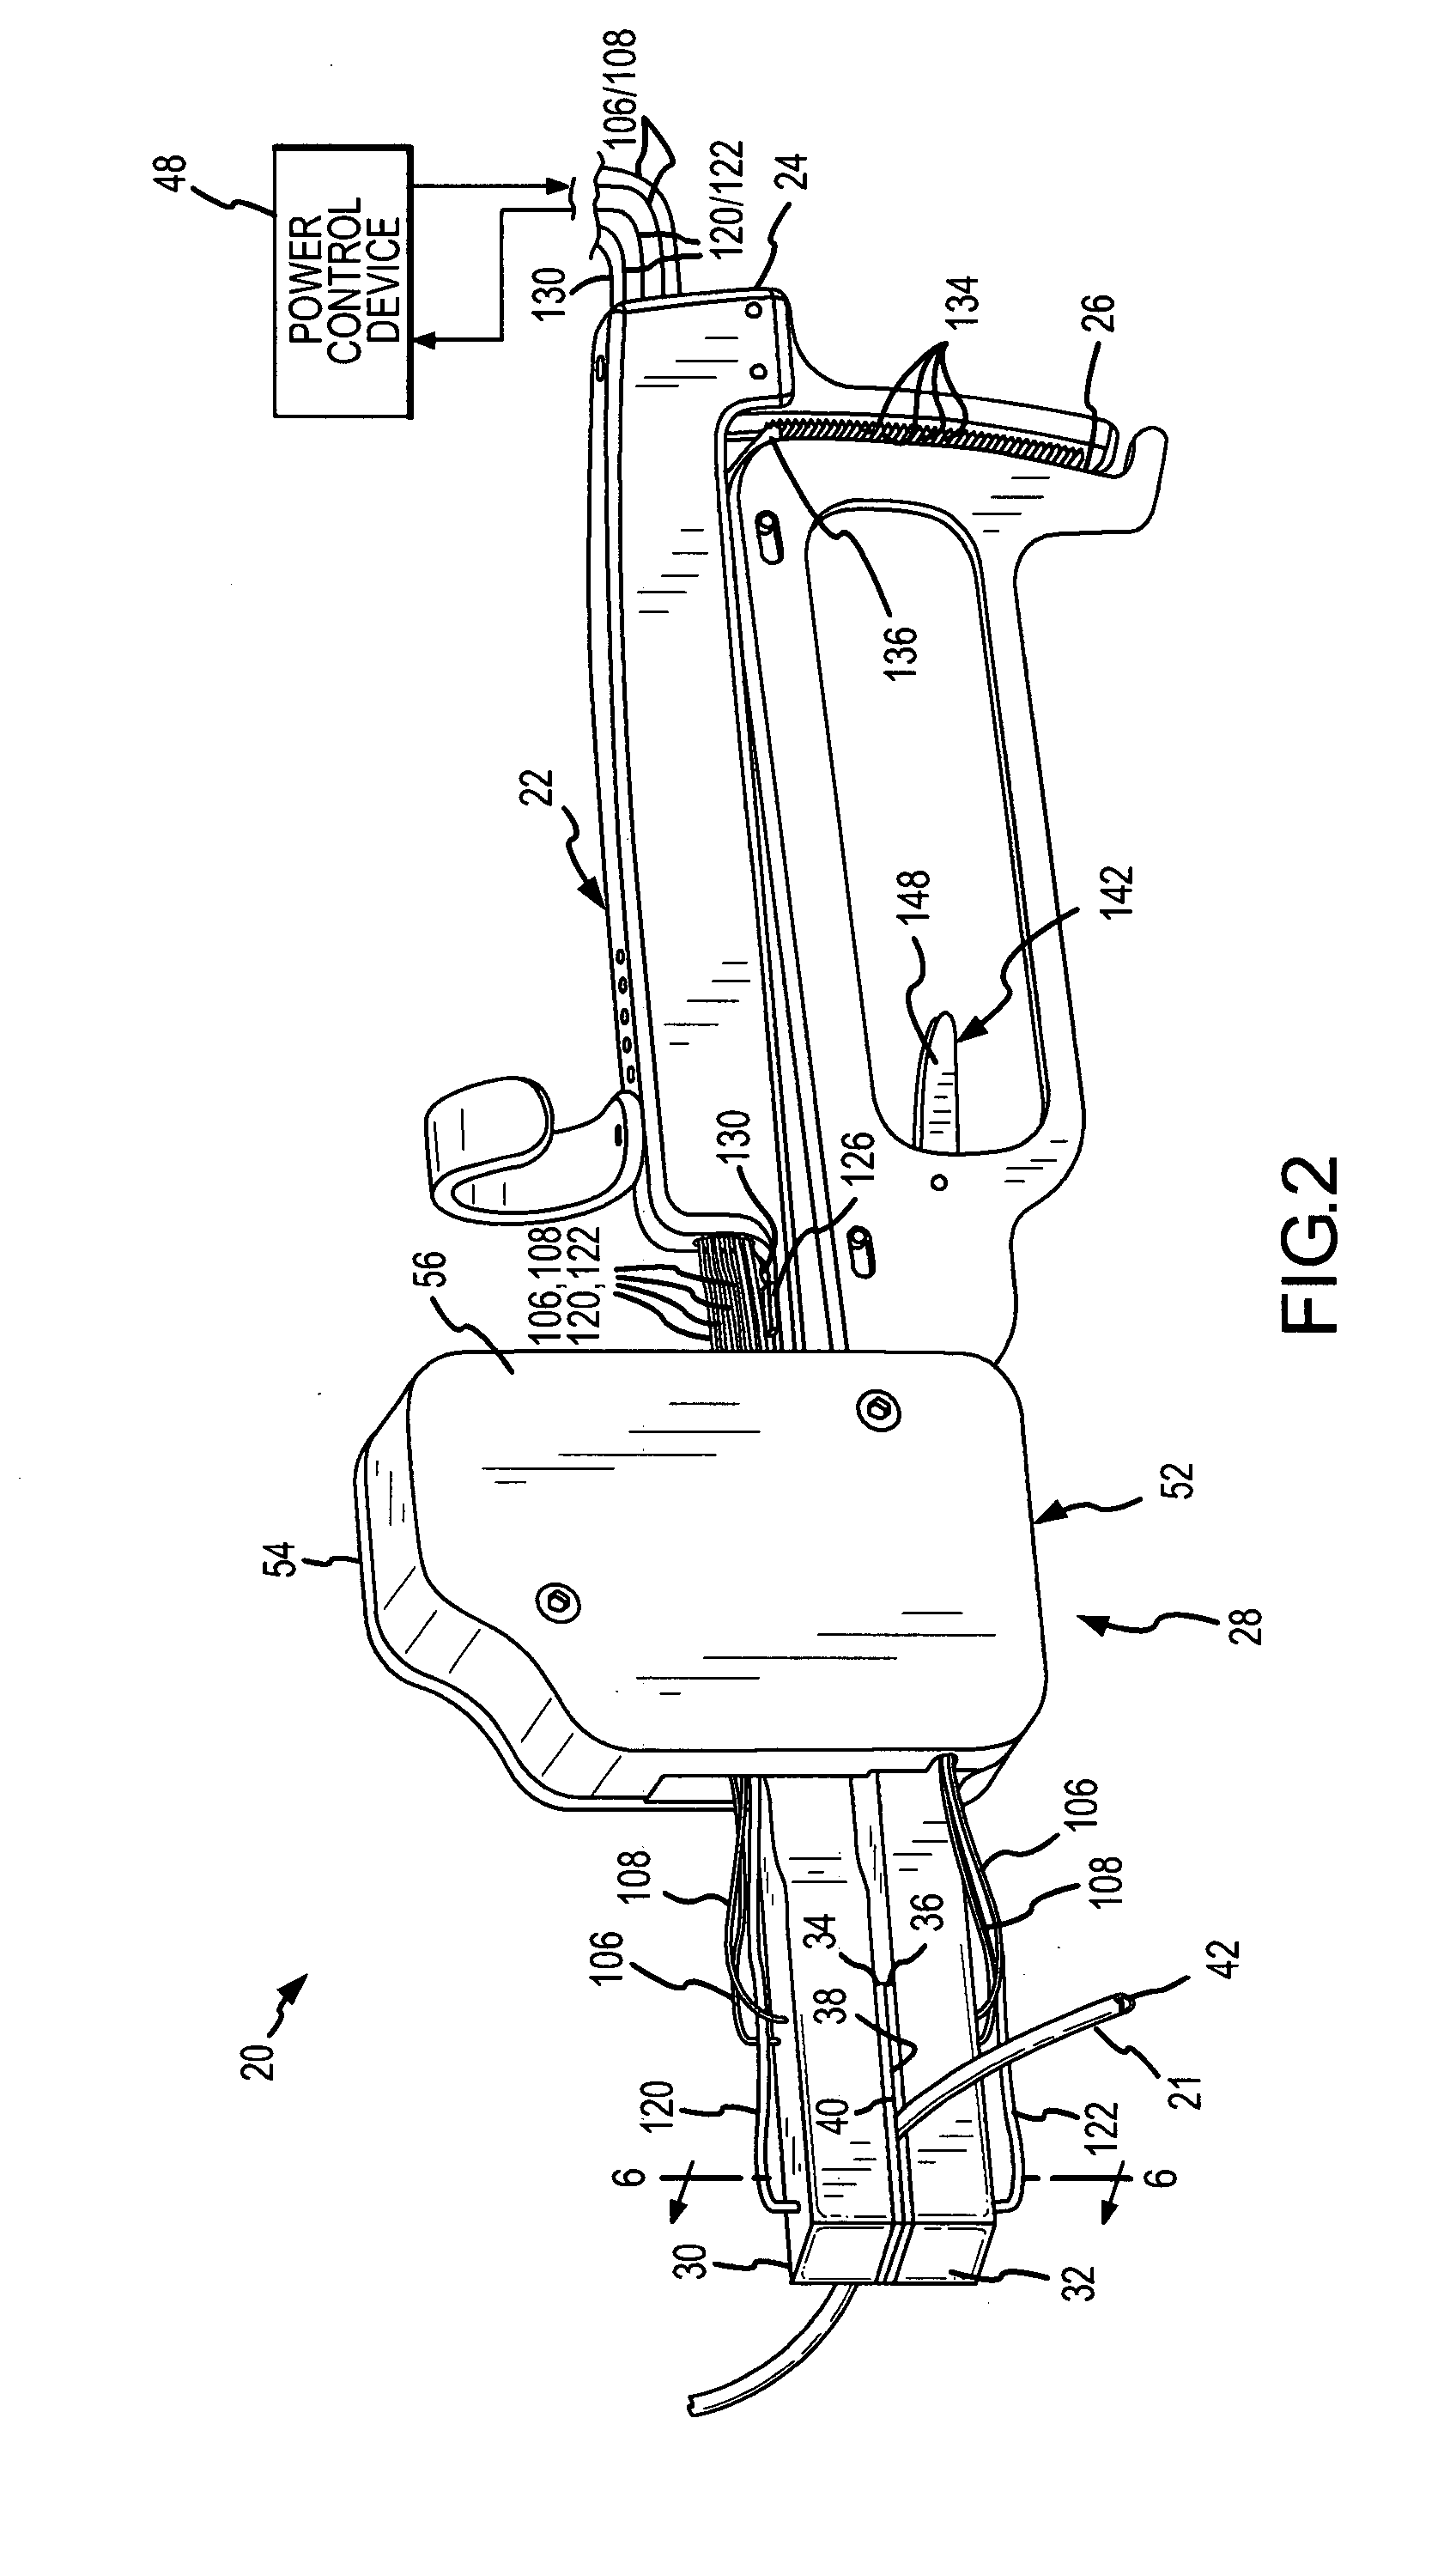 Tissue fusion instrument and method to reduce the adhesion of tissue to its working surfaces